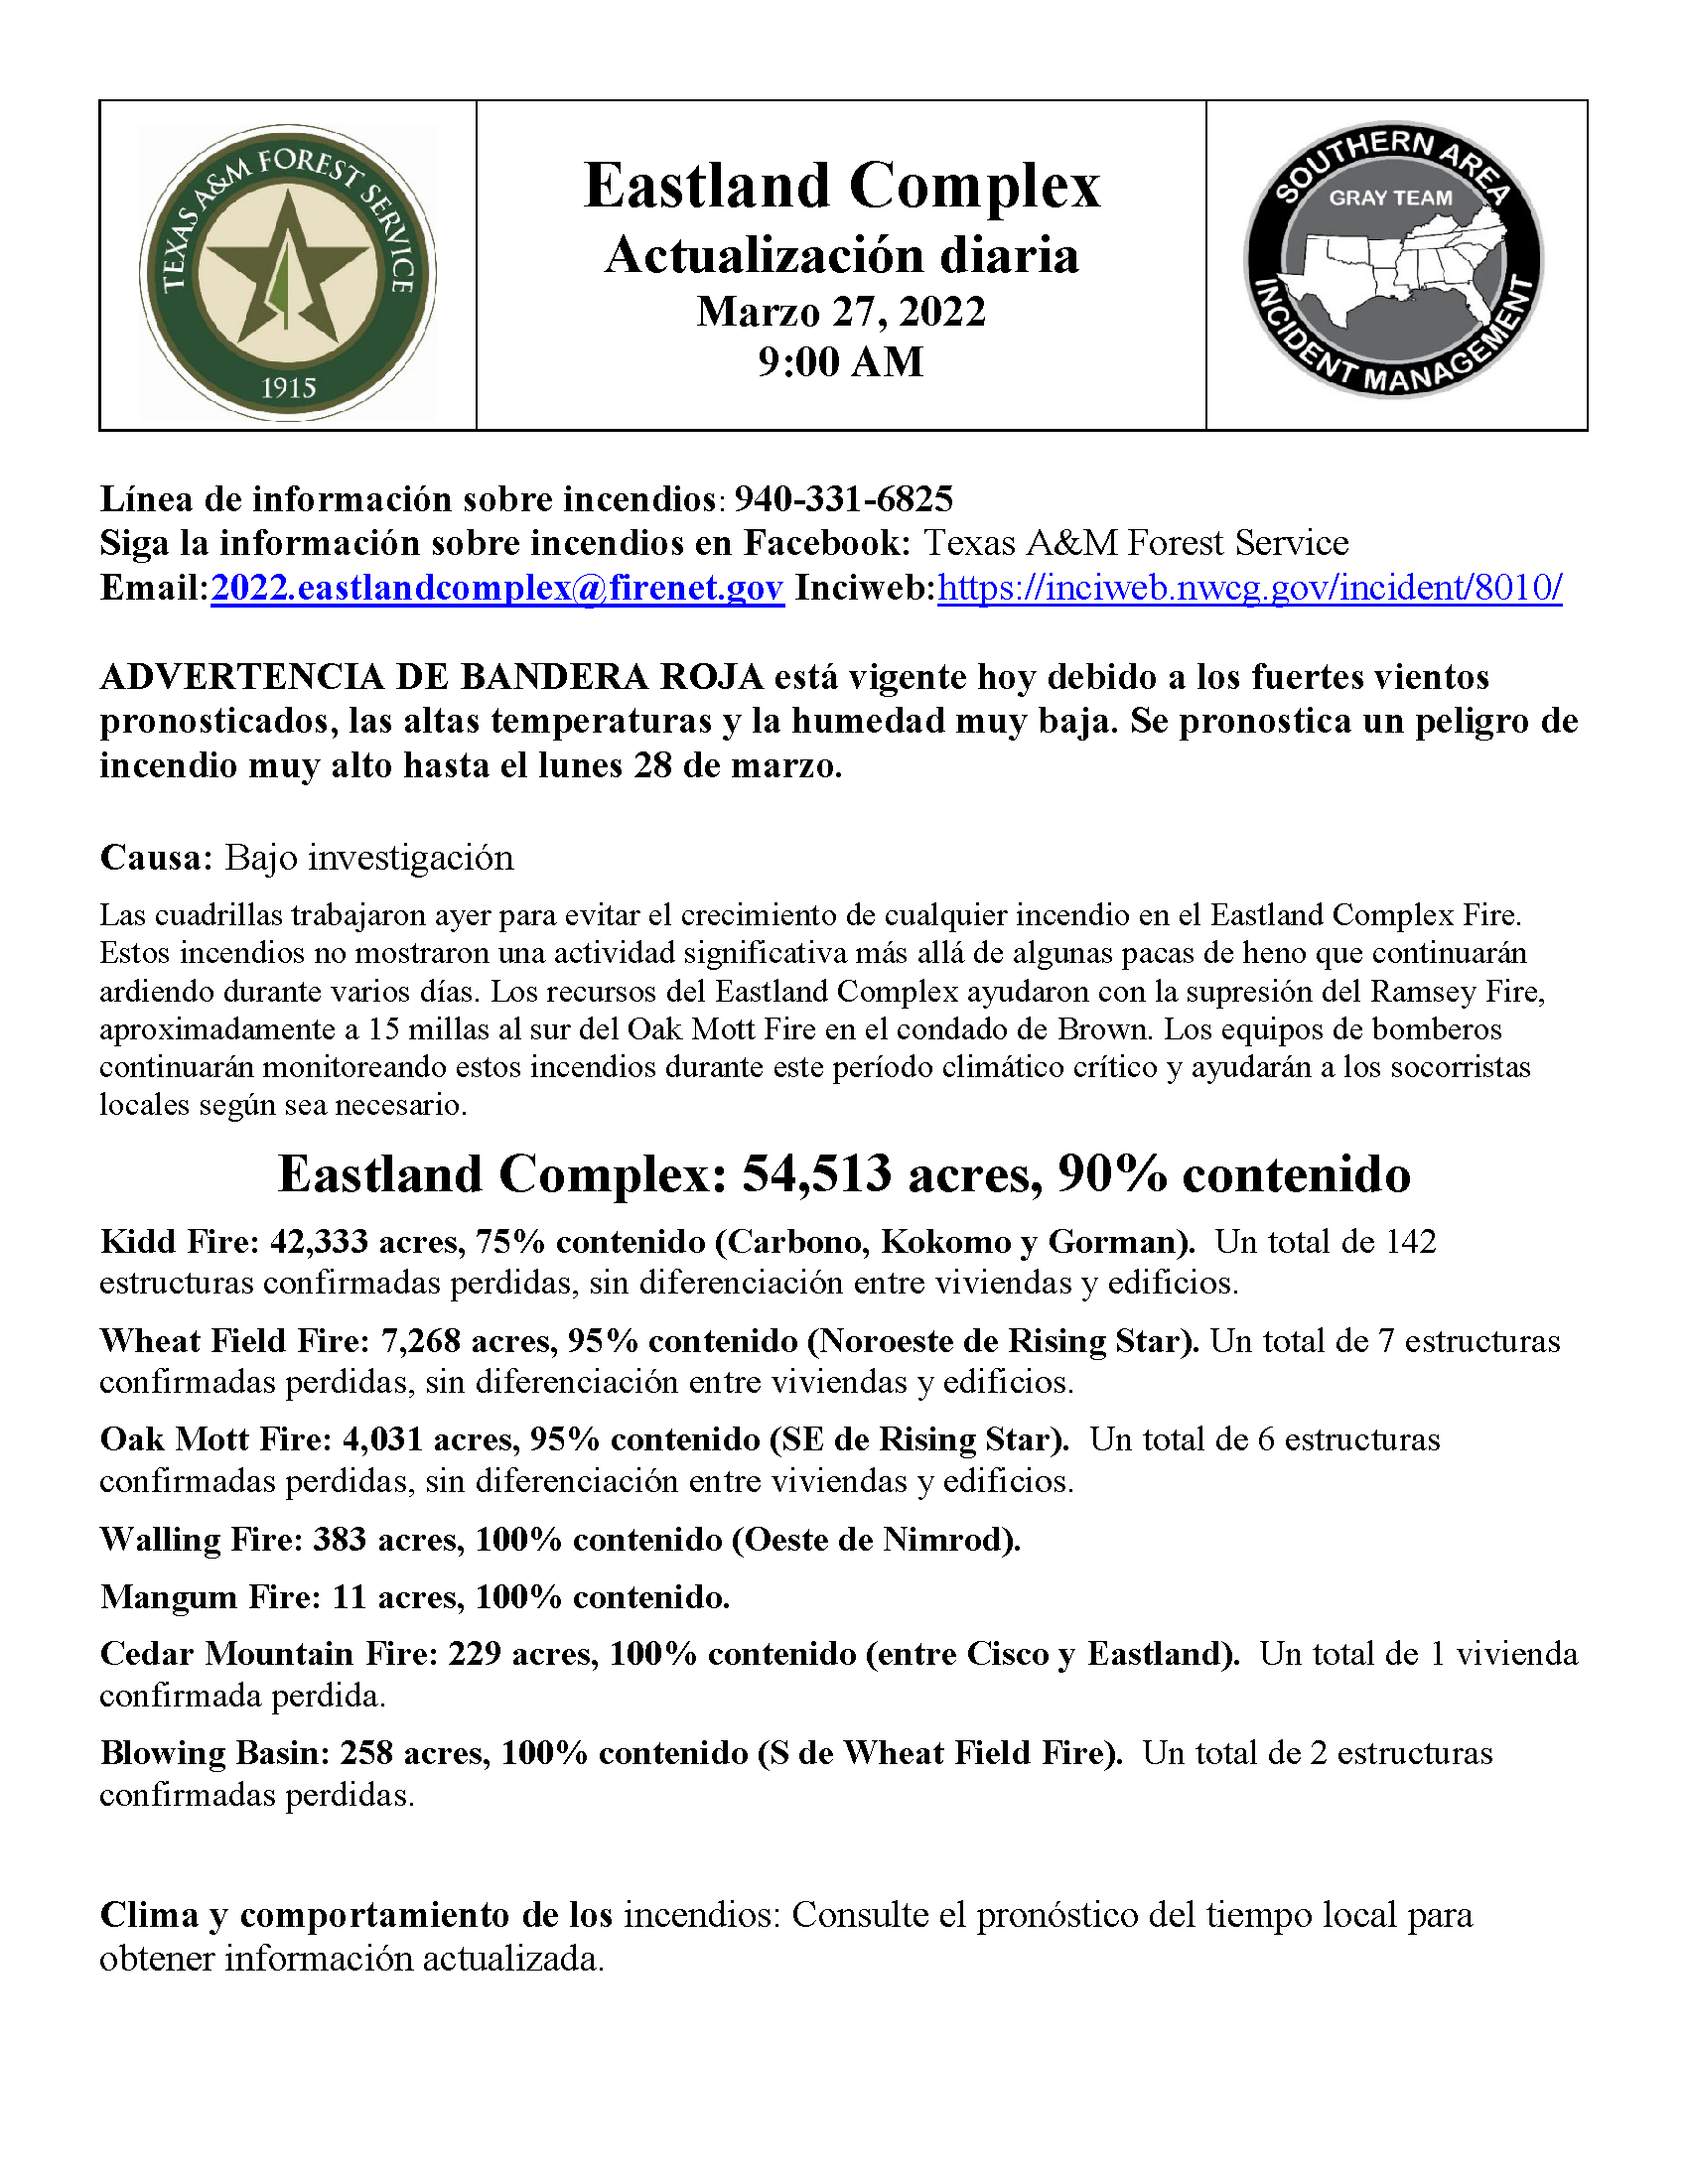 The document contains the March 27th daily update for Eastland Complex fire in Spanish